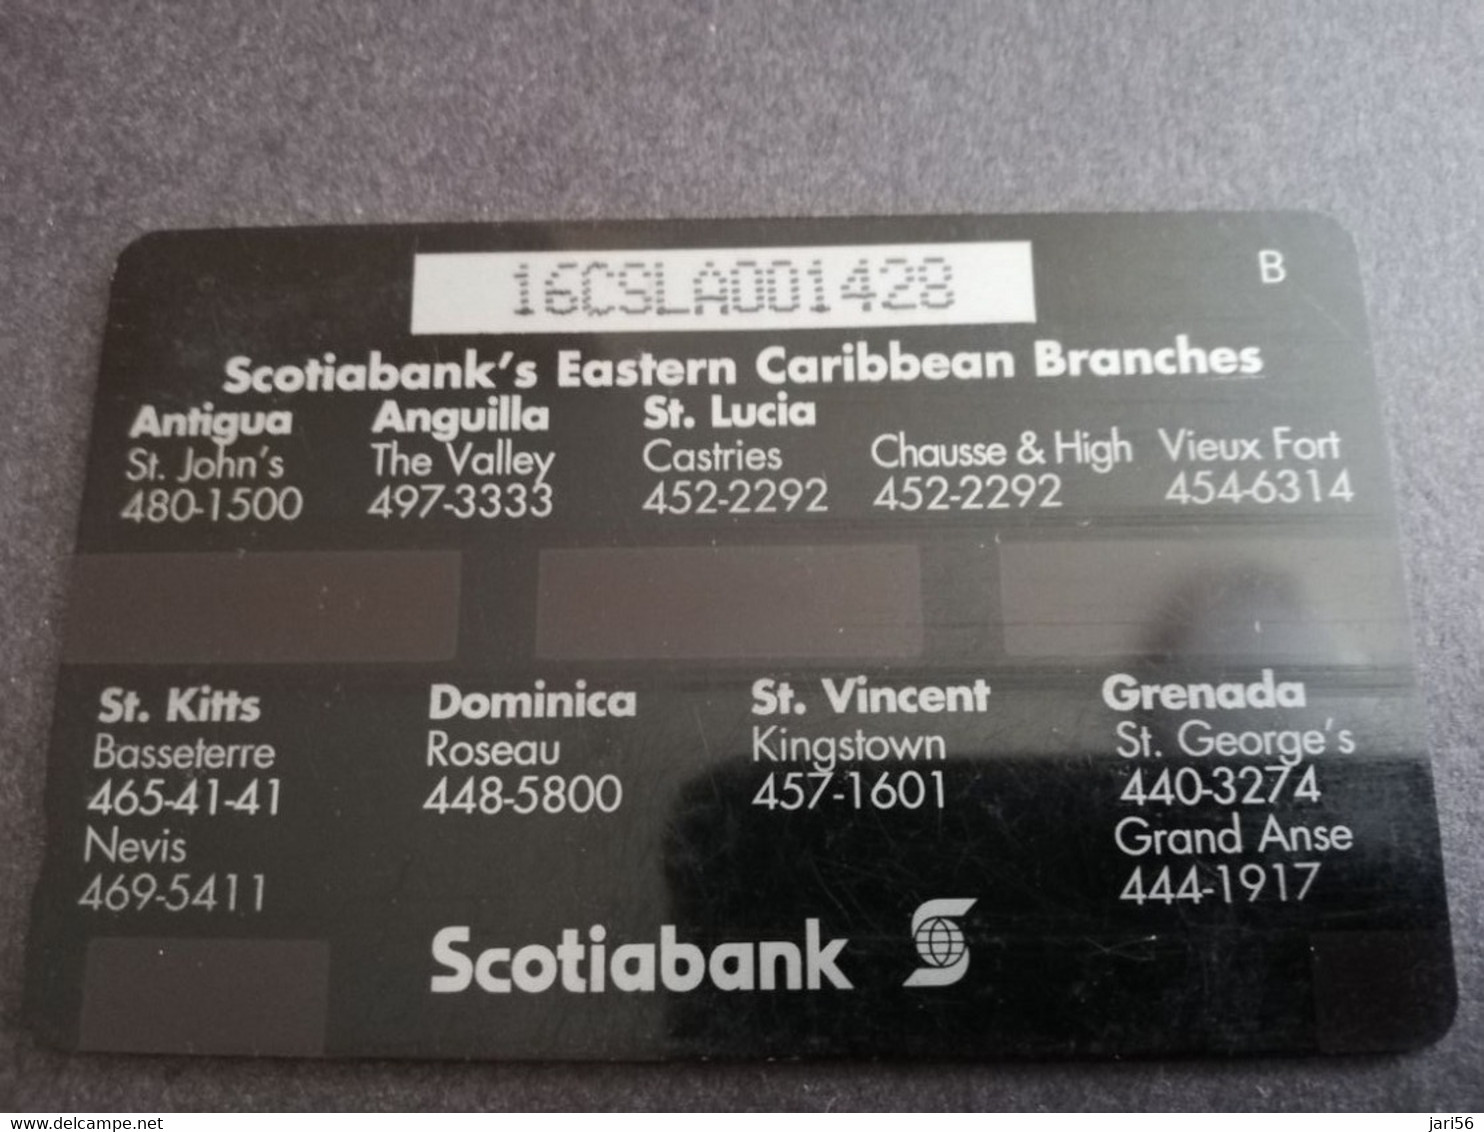 ST LUCIA    $ 20  CABLE & WIRELESS   SCOTIABANK    16CSLA   Fine Used Card ** 6125** - Sainte Lucie